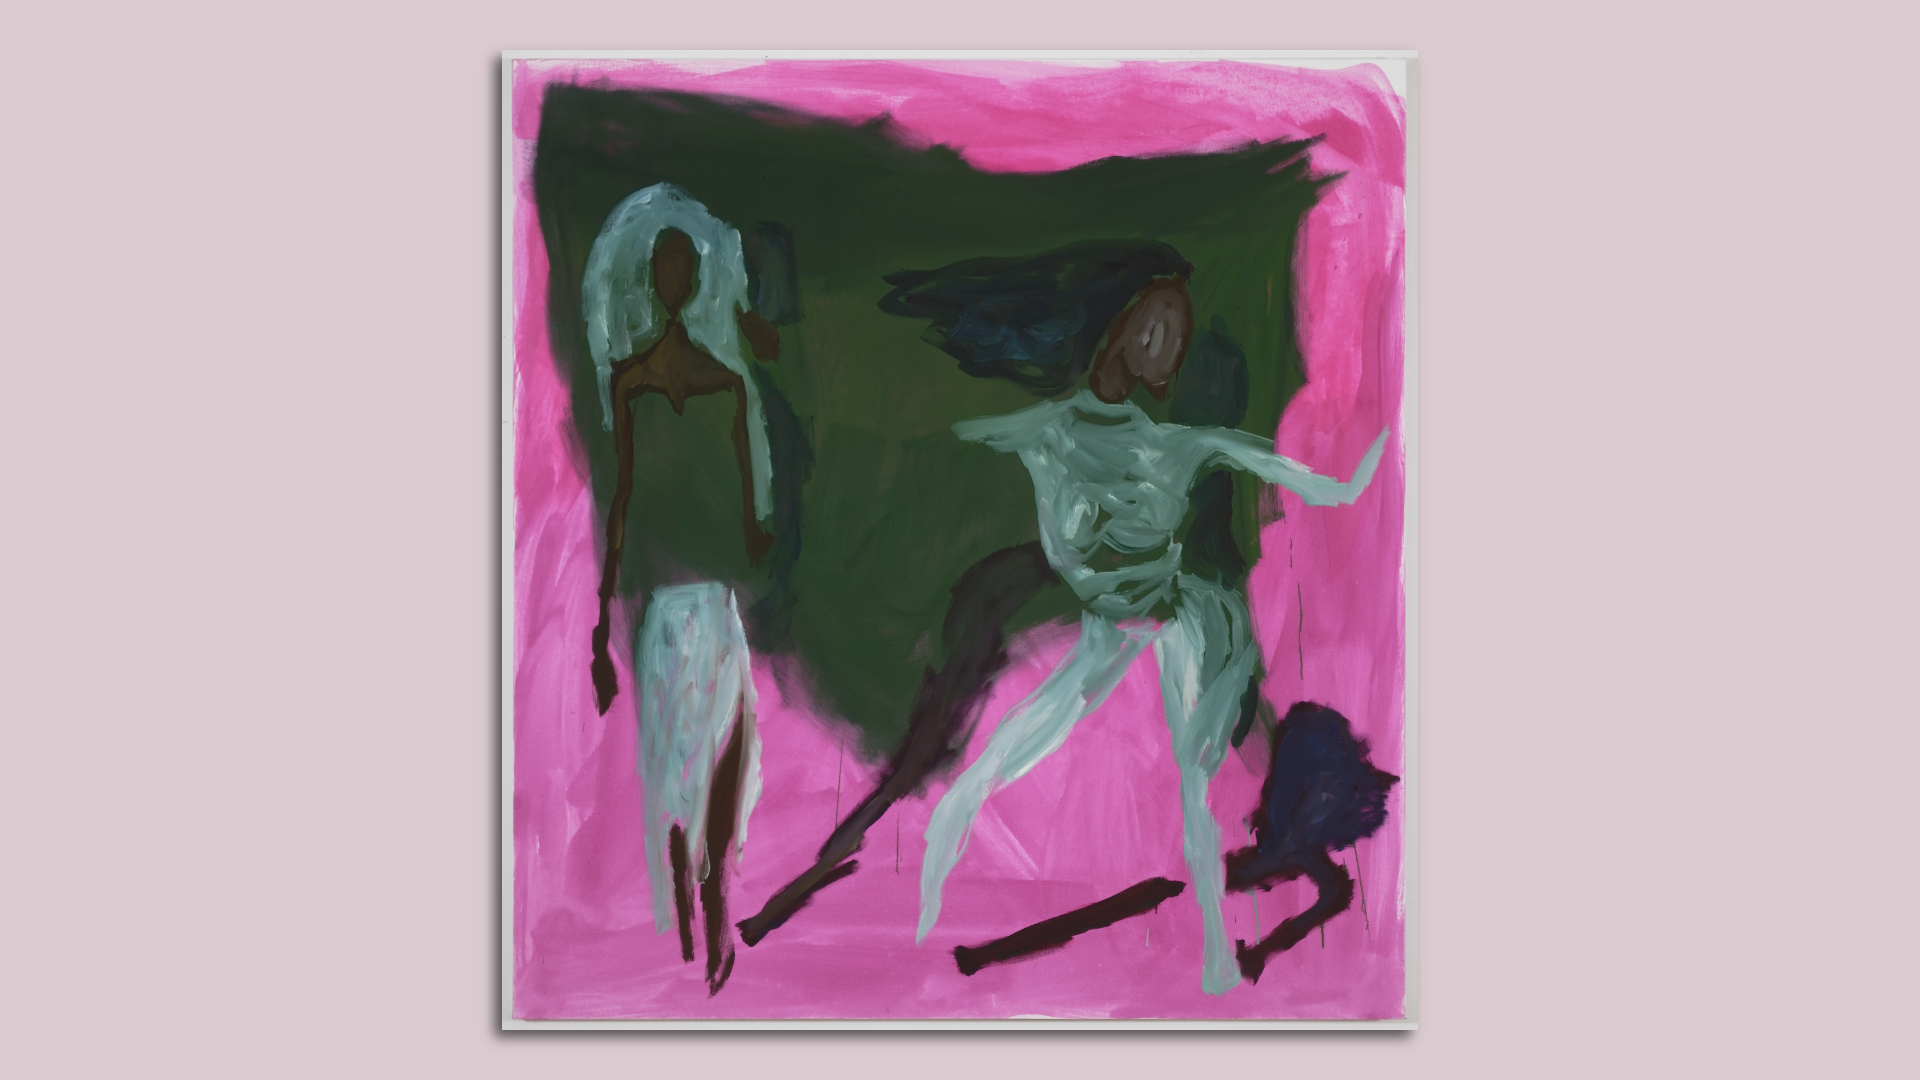 An image of an oil on canvas painting of two individuals in front of a pink background, by Enrico Riley, called "Together VIII"